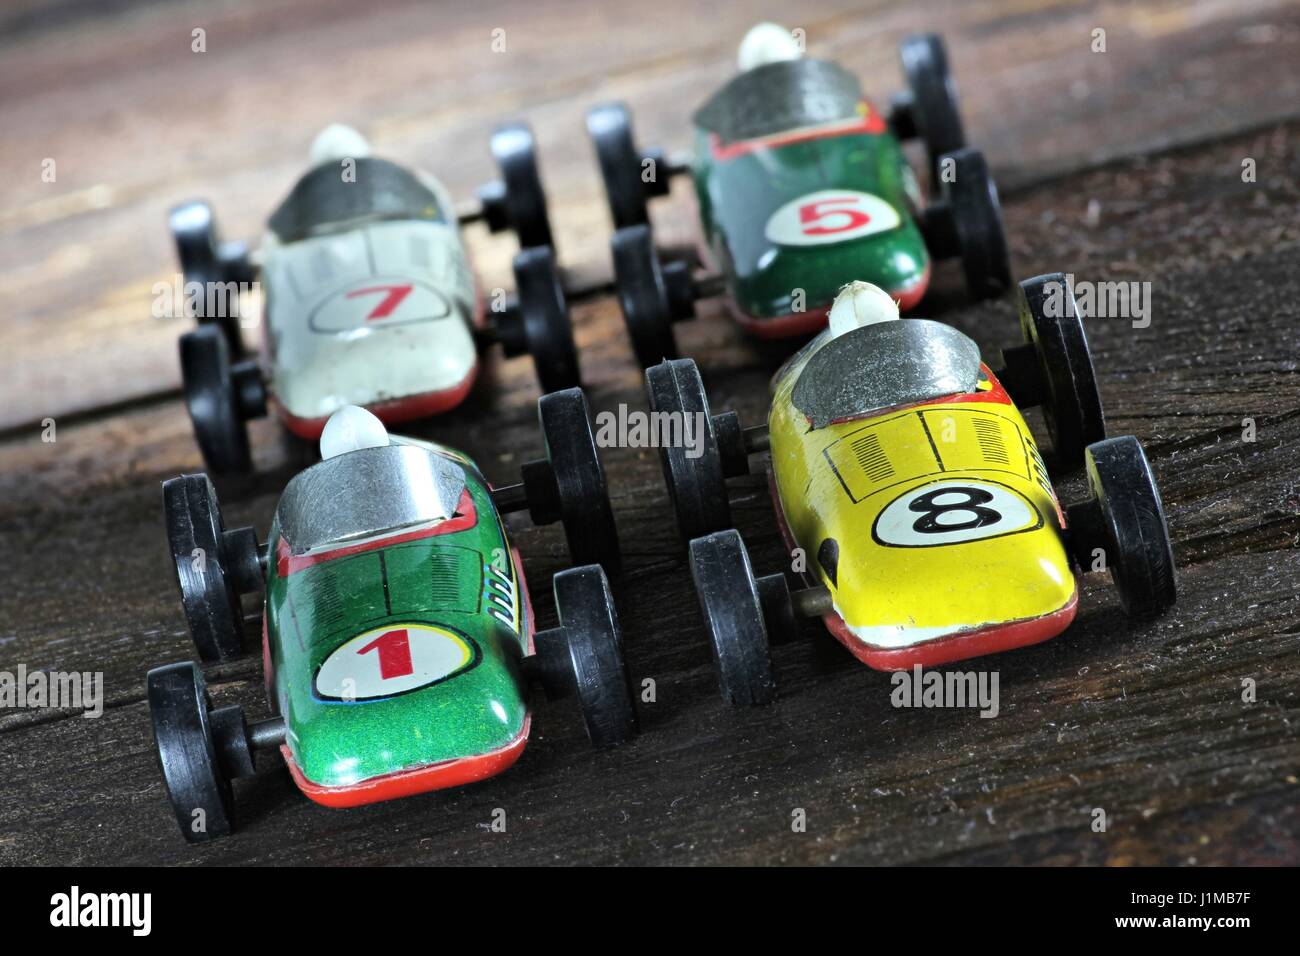 old model racers on wooden background Stock Photo